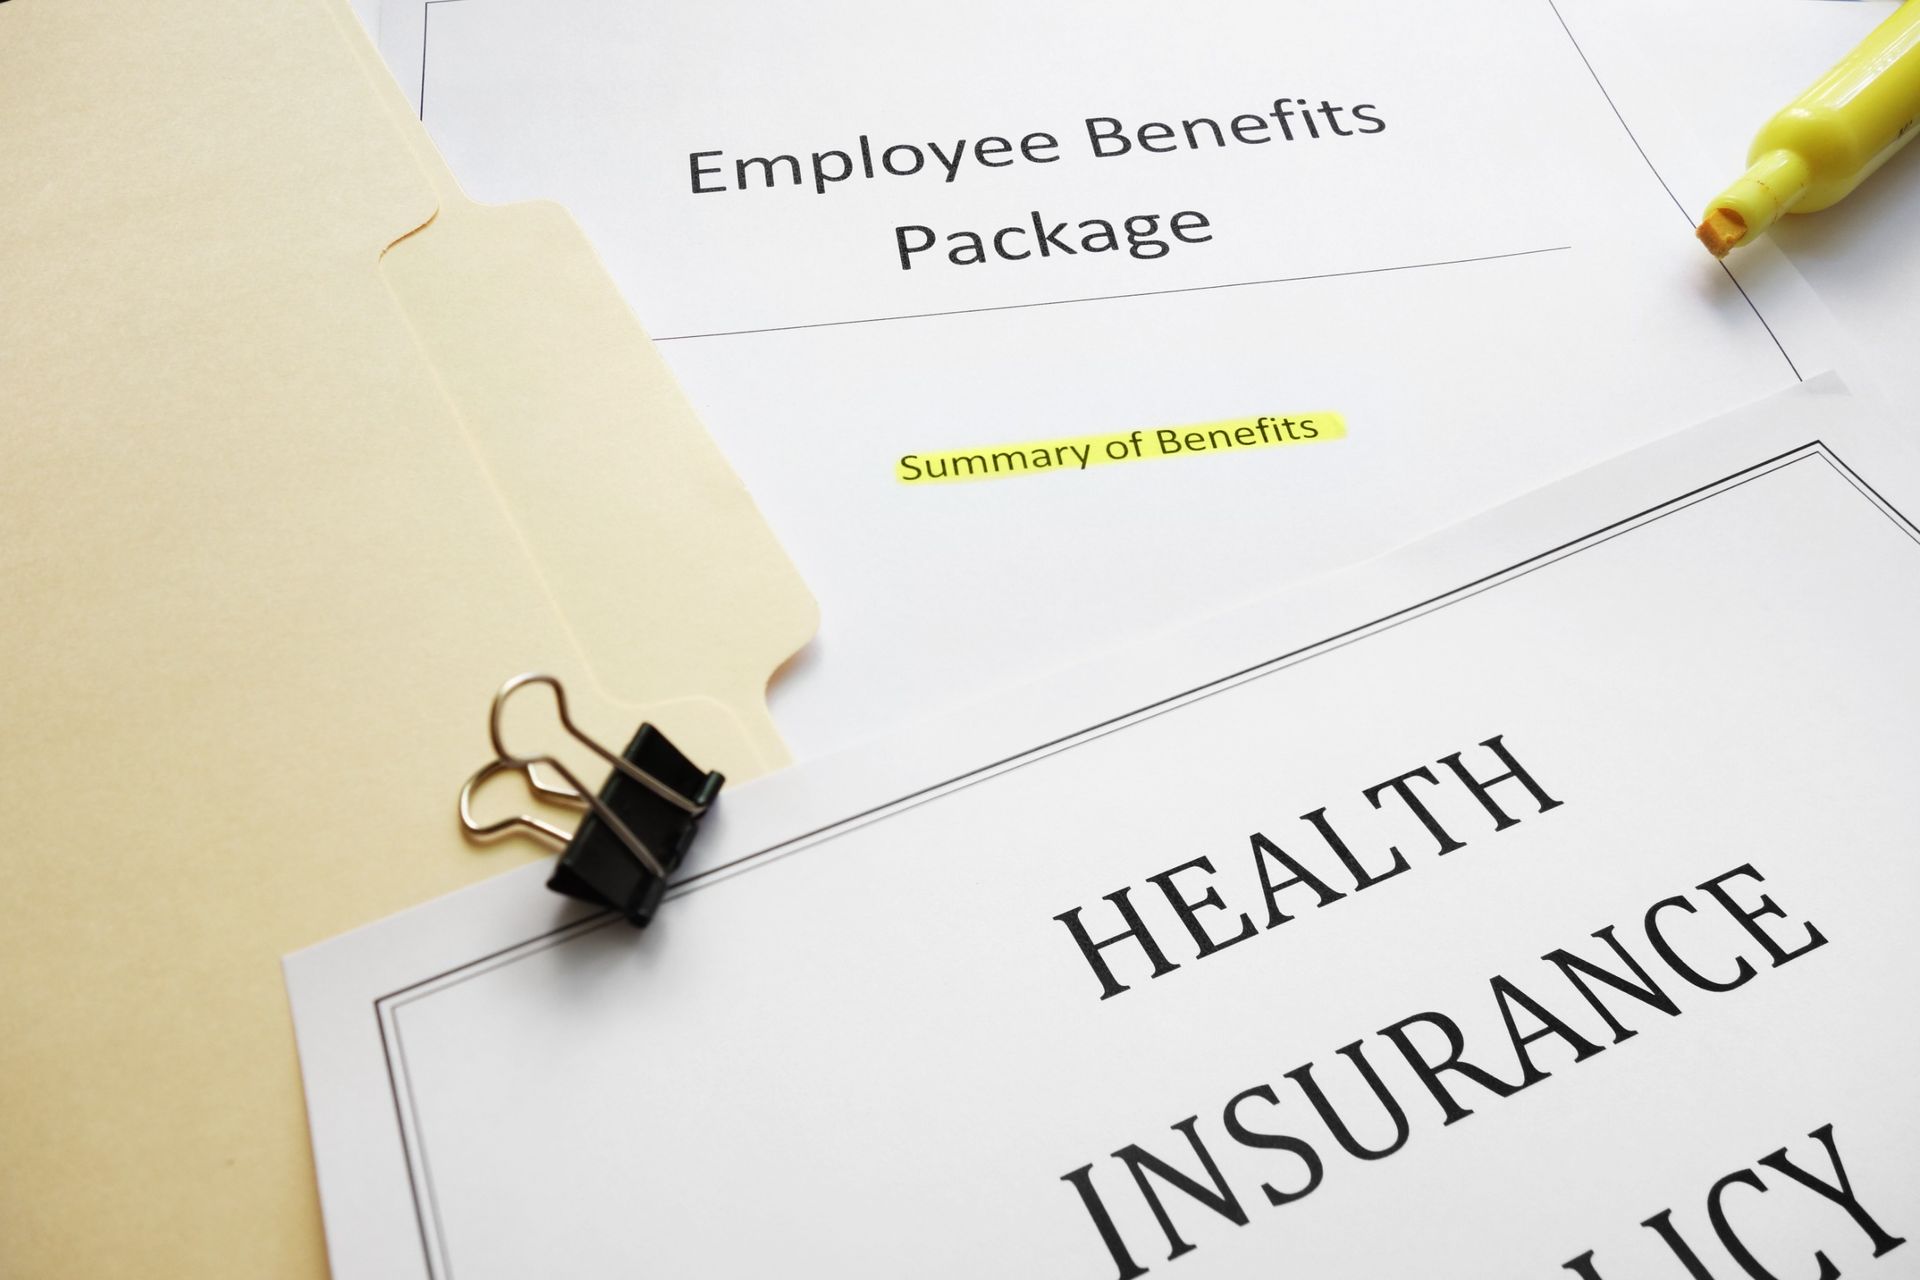 Employee Insurance in the Sunshine State